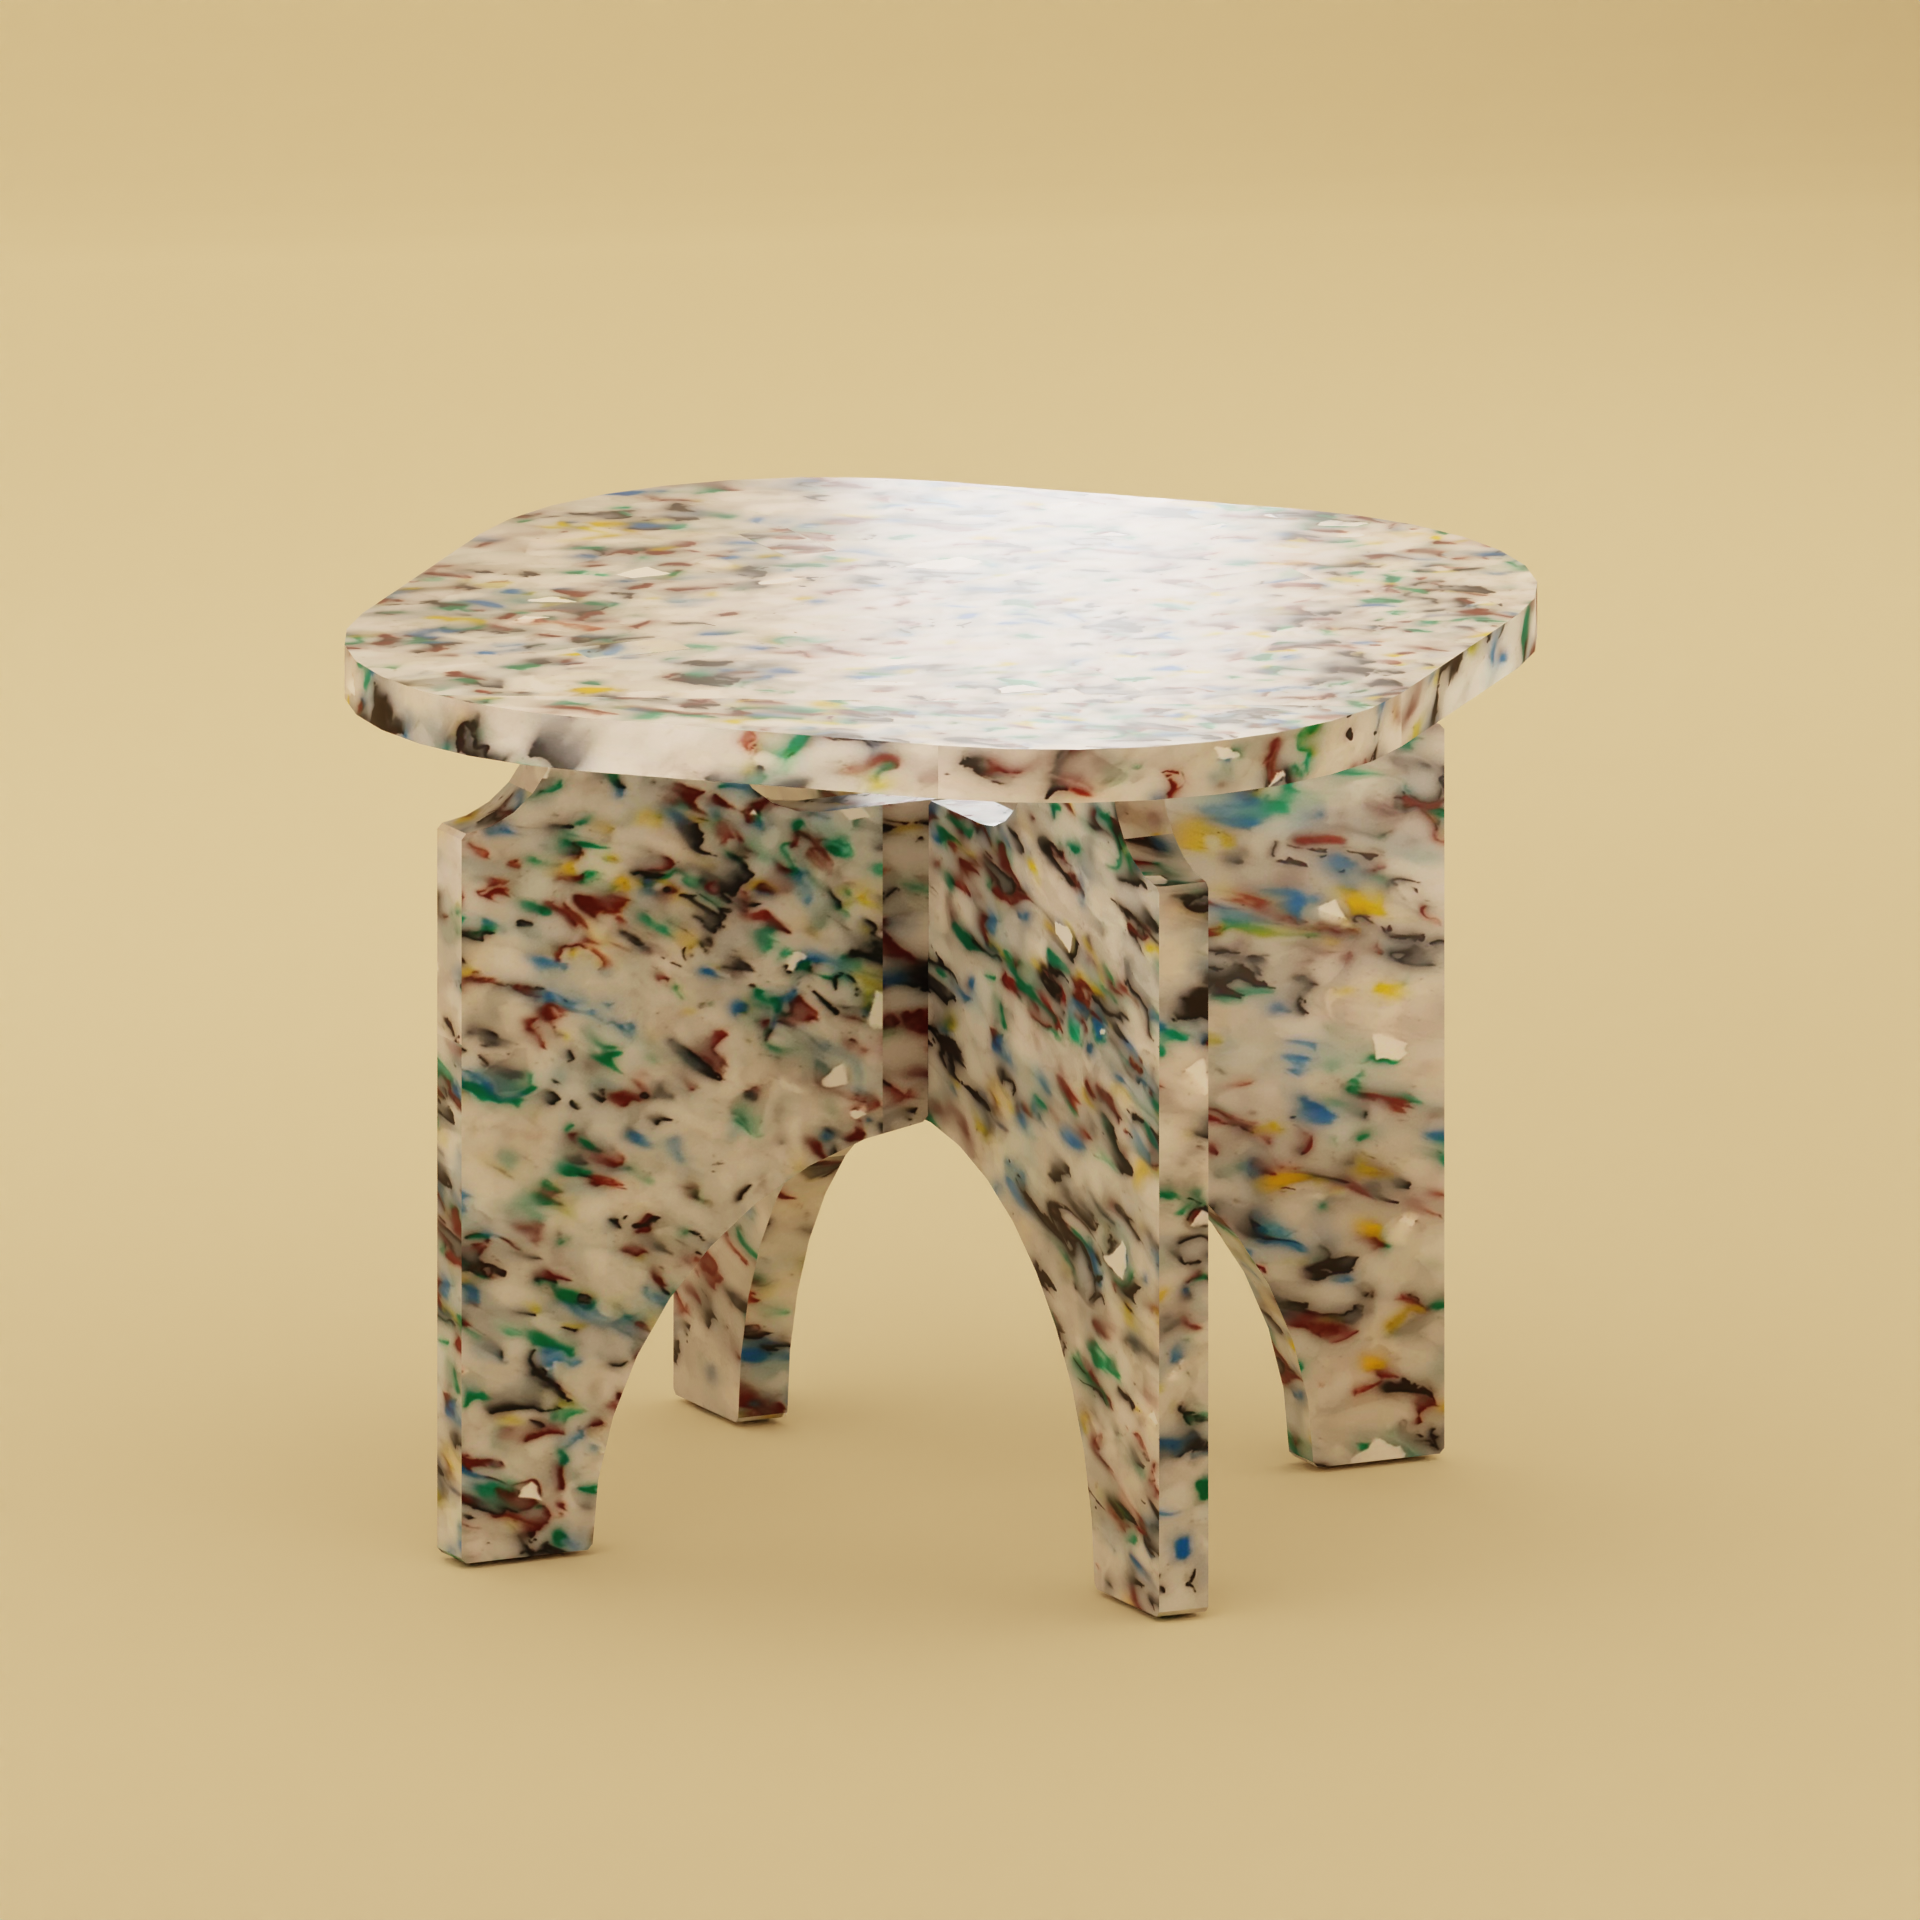 COLOURFUL SQUARE TOP STOOL BY THE MINIMONO PROJECT - BRAND FOR ECO FRIENDLY - PLAYFUL - MULTI FUNCTIONAL - SUSTAINABLE - HIGH QUALITY - DESIGN FURNITURE FROM RECYCLED PLASTIC FOR BOTH ADULT AND CHILDREN MADE IN BERLIN GERMANY